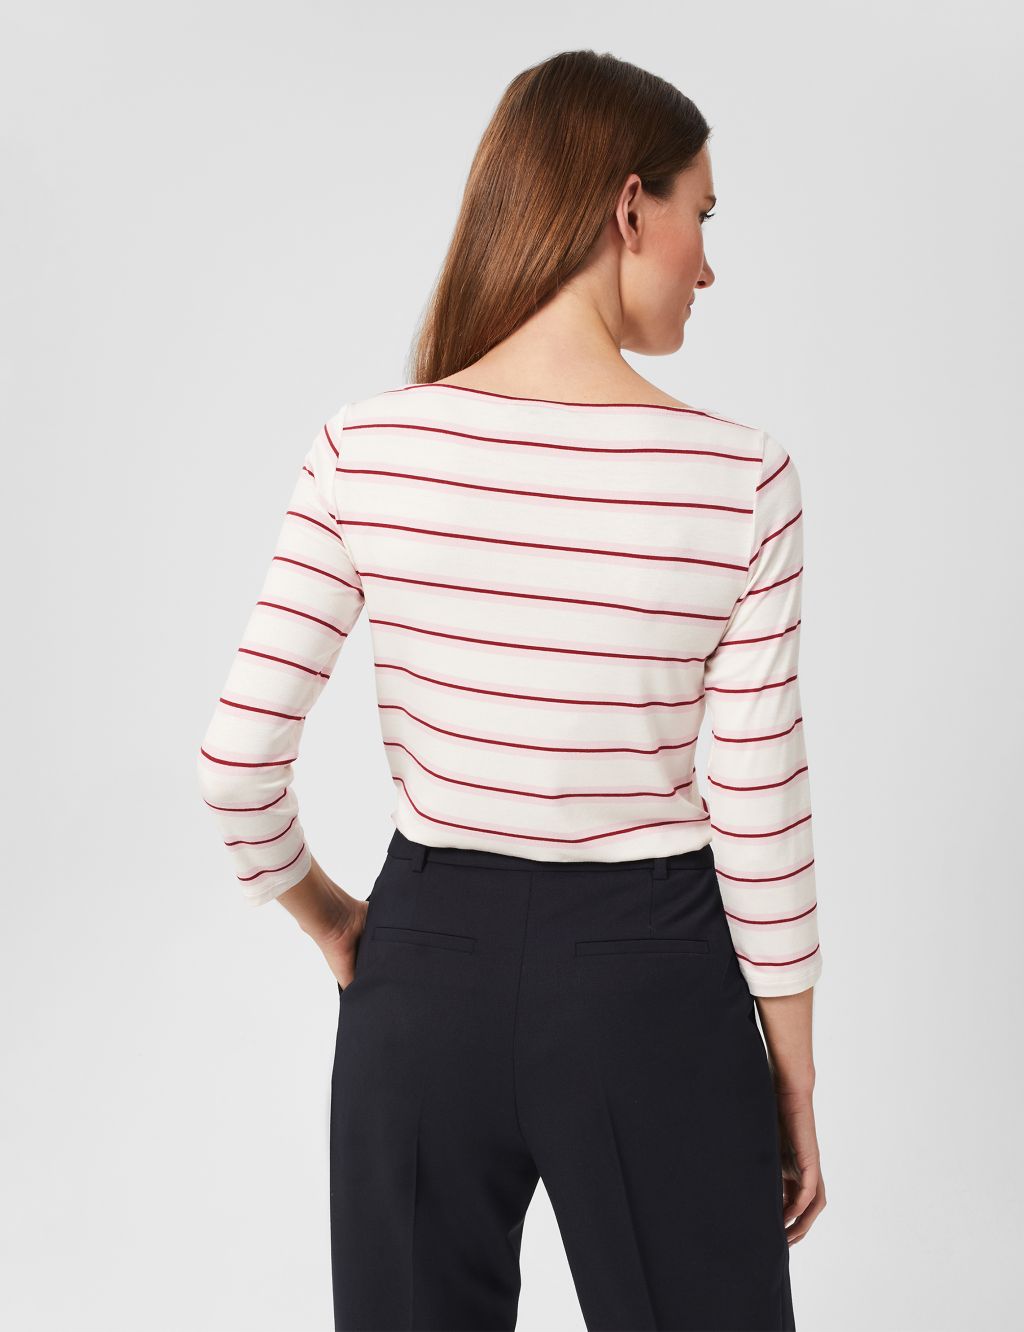 Striped Top image 2